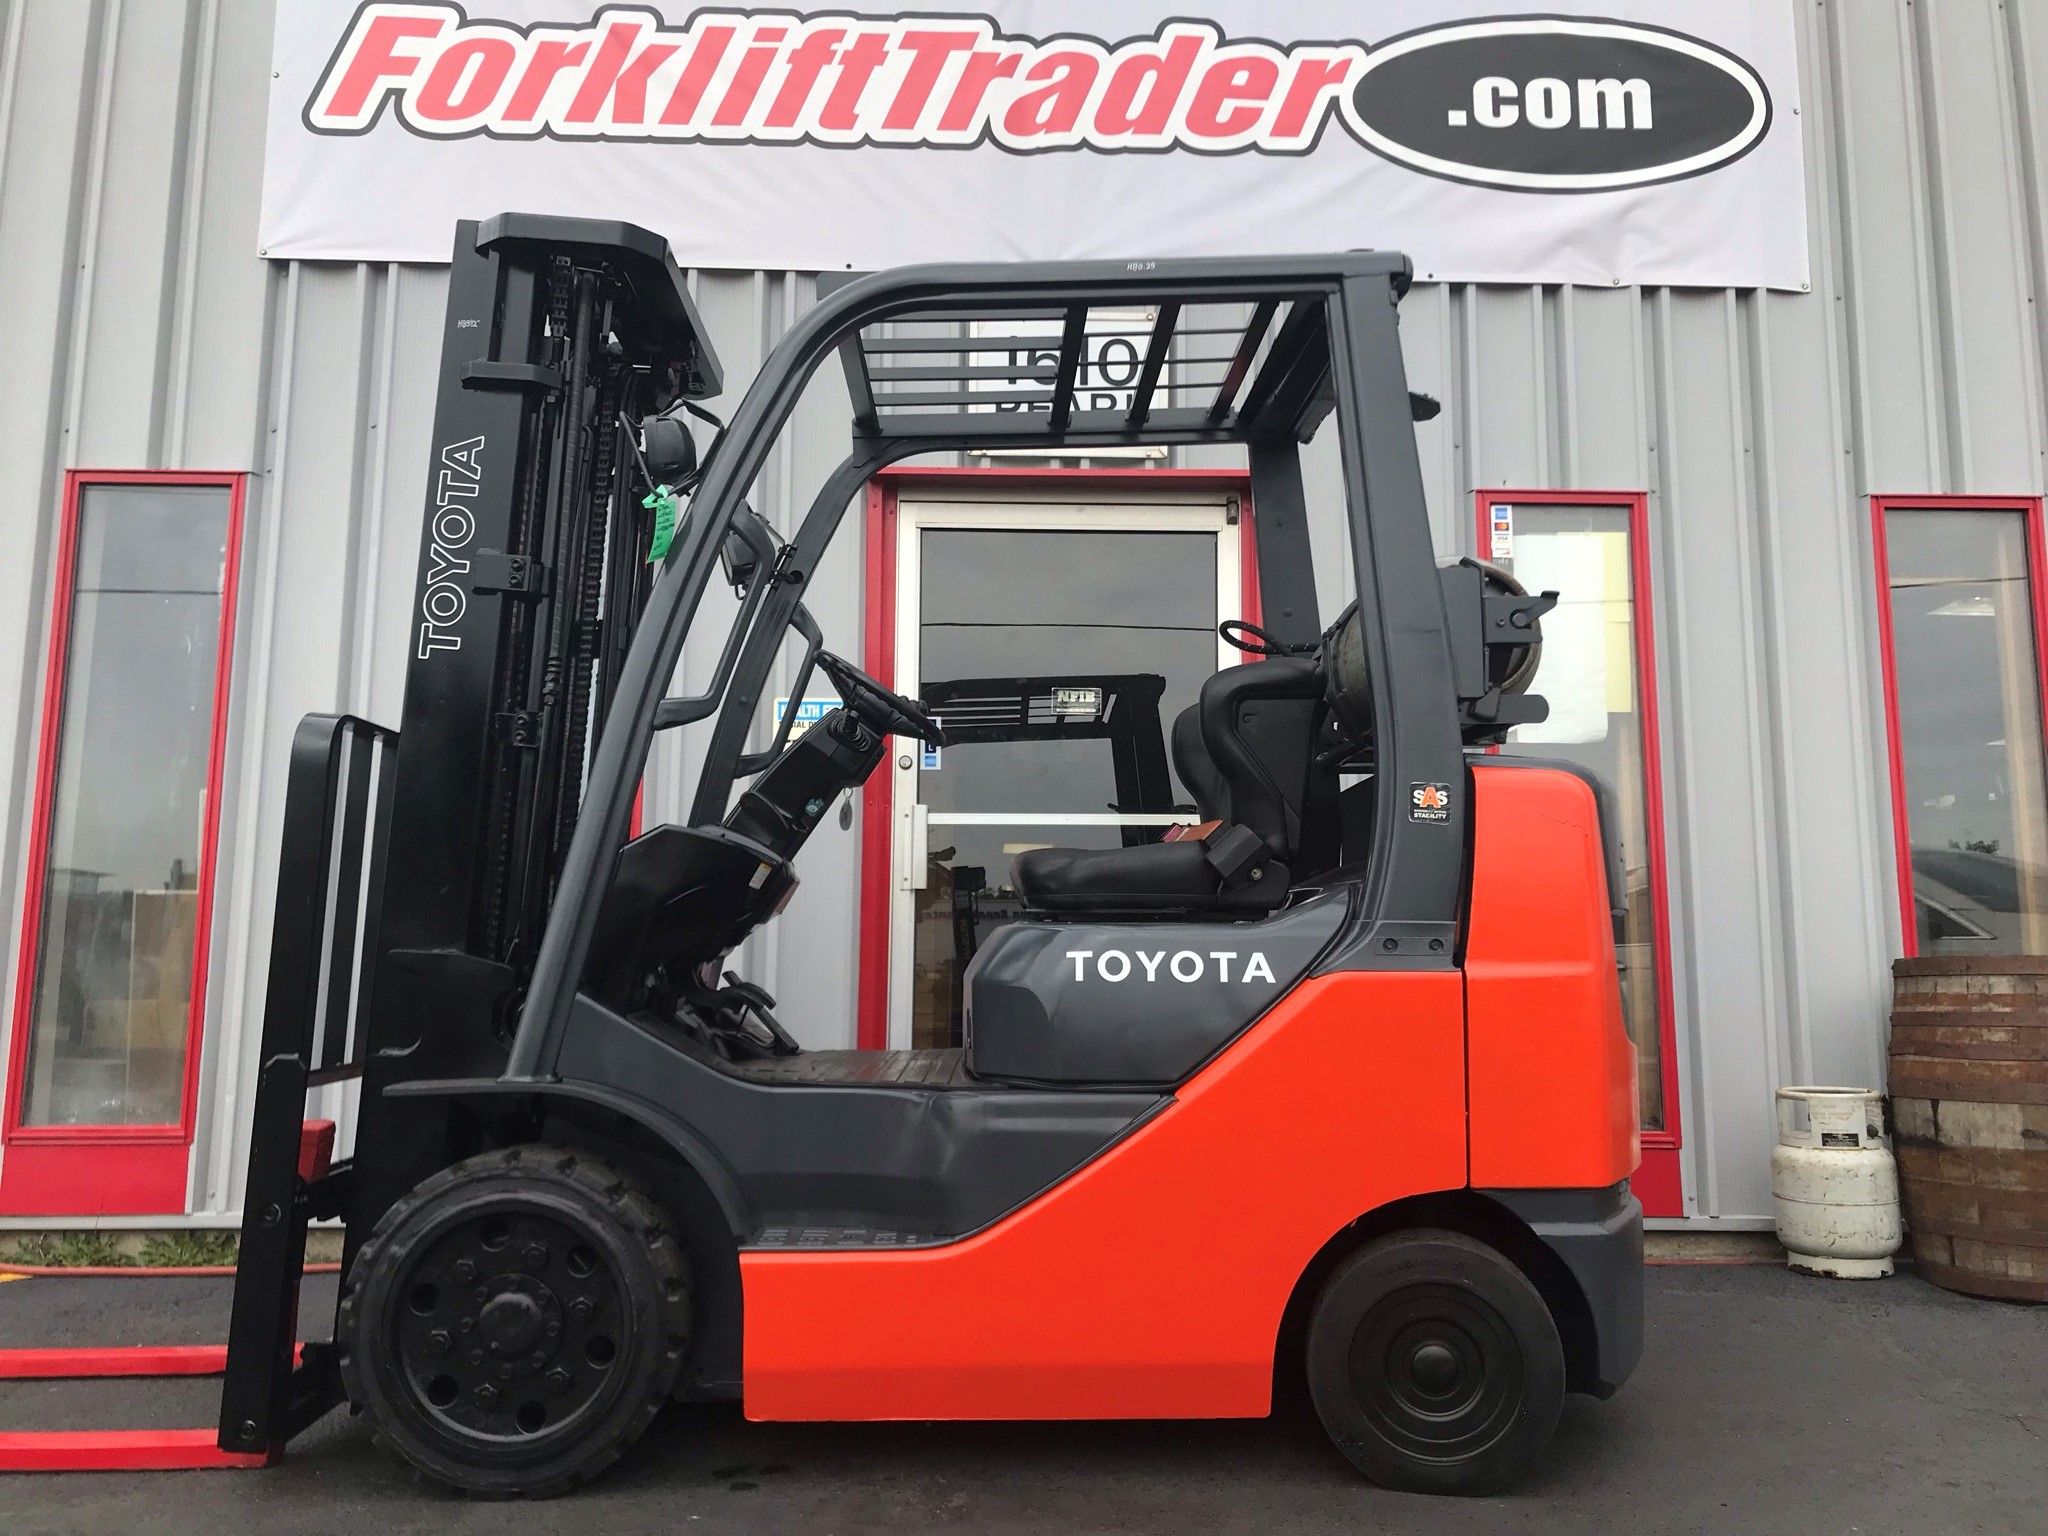 5,000lb capacity 2014 toyota forklift for sale